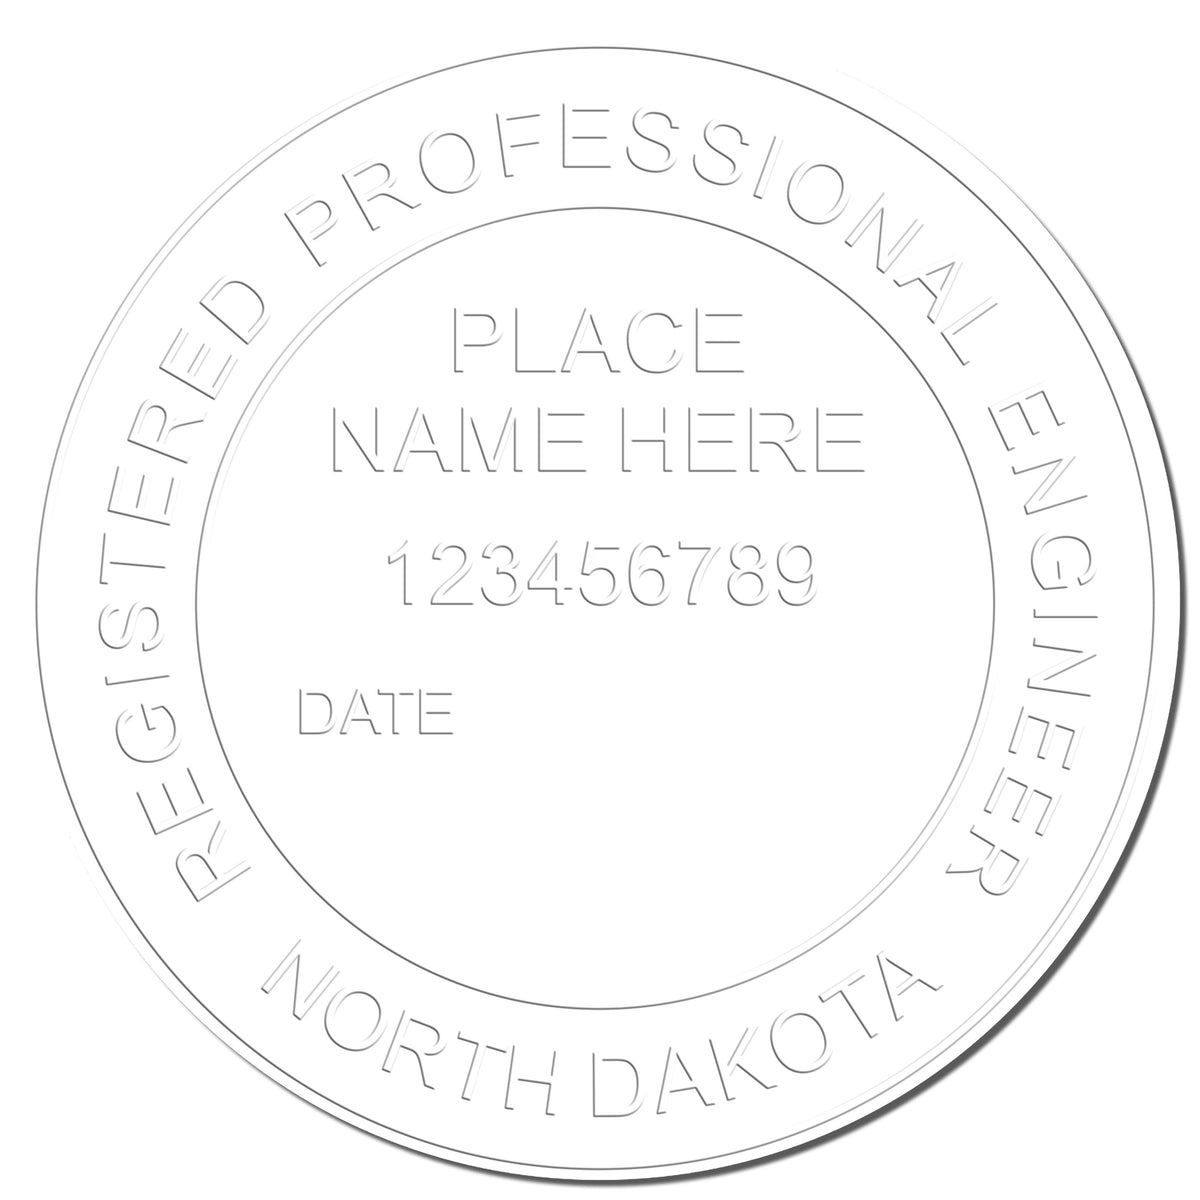 A photograph of the Handheld North Dakota Professional Engineer Embosser stamp impression reveals a vivid, professional image of the on paper.